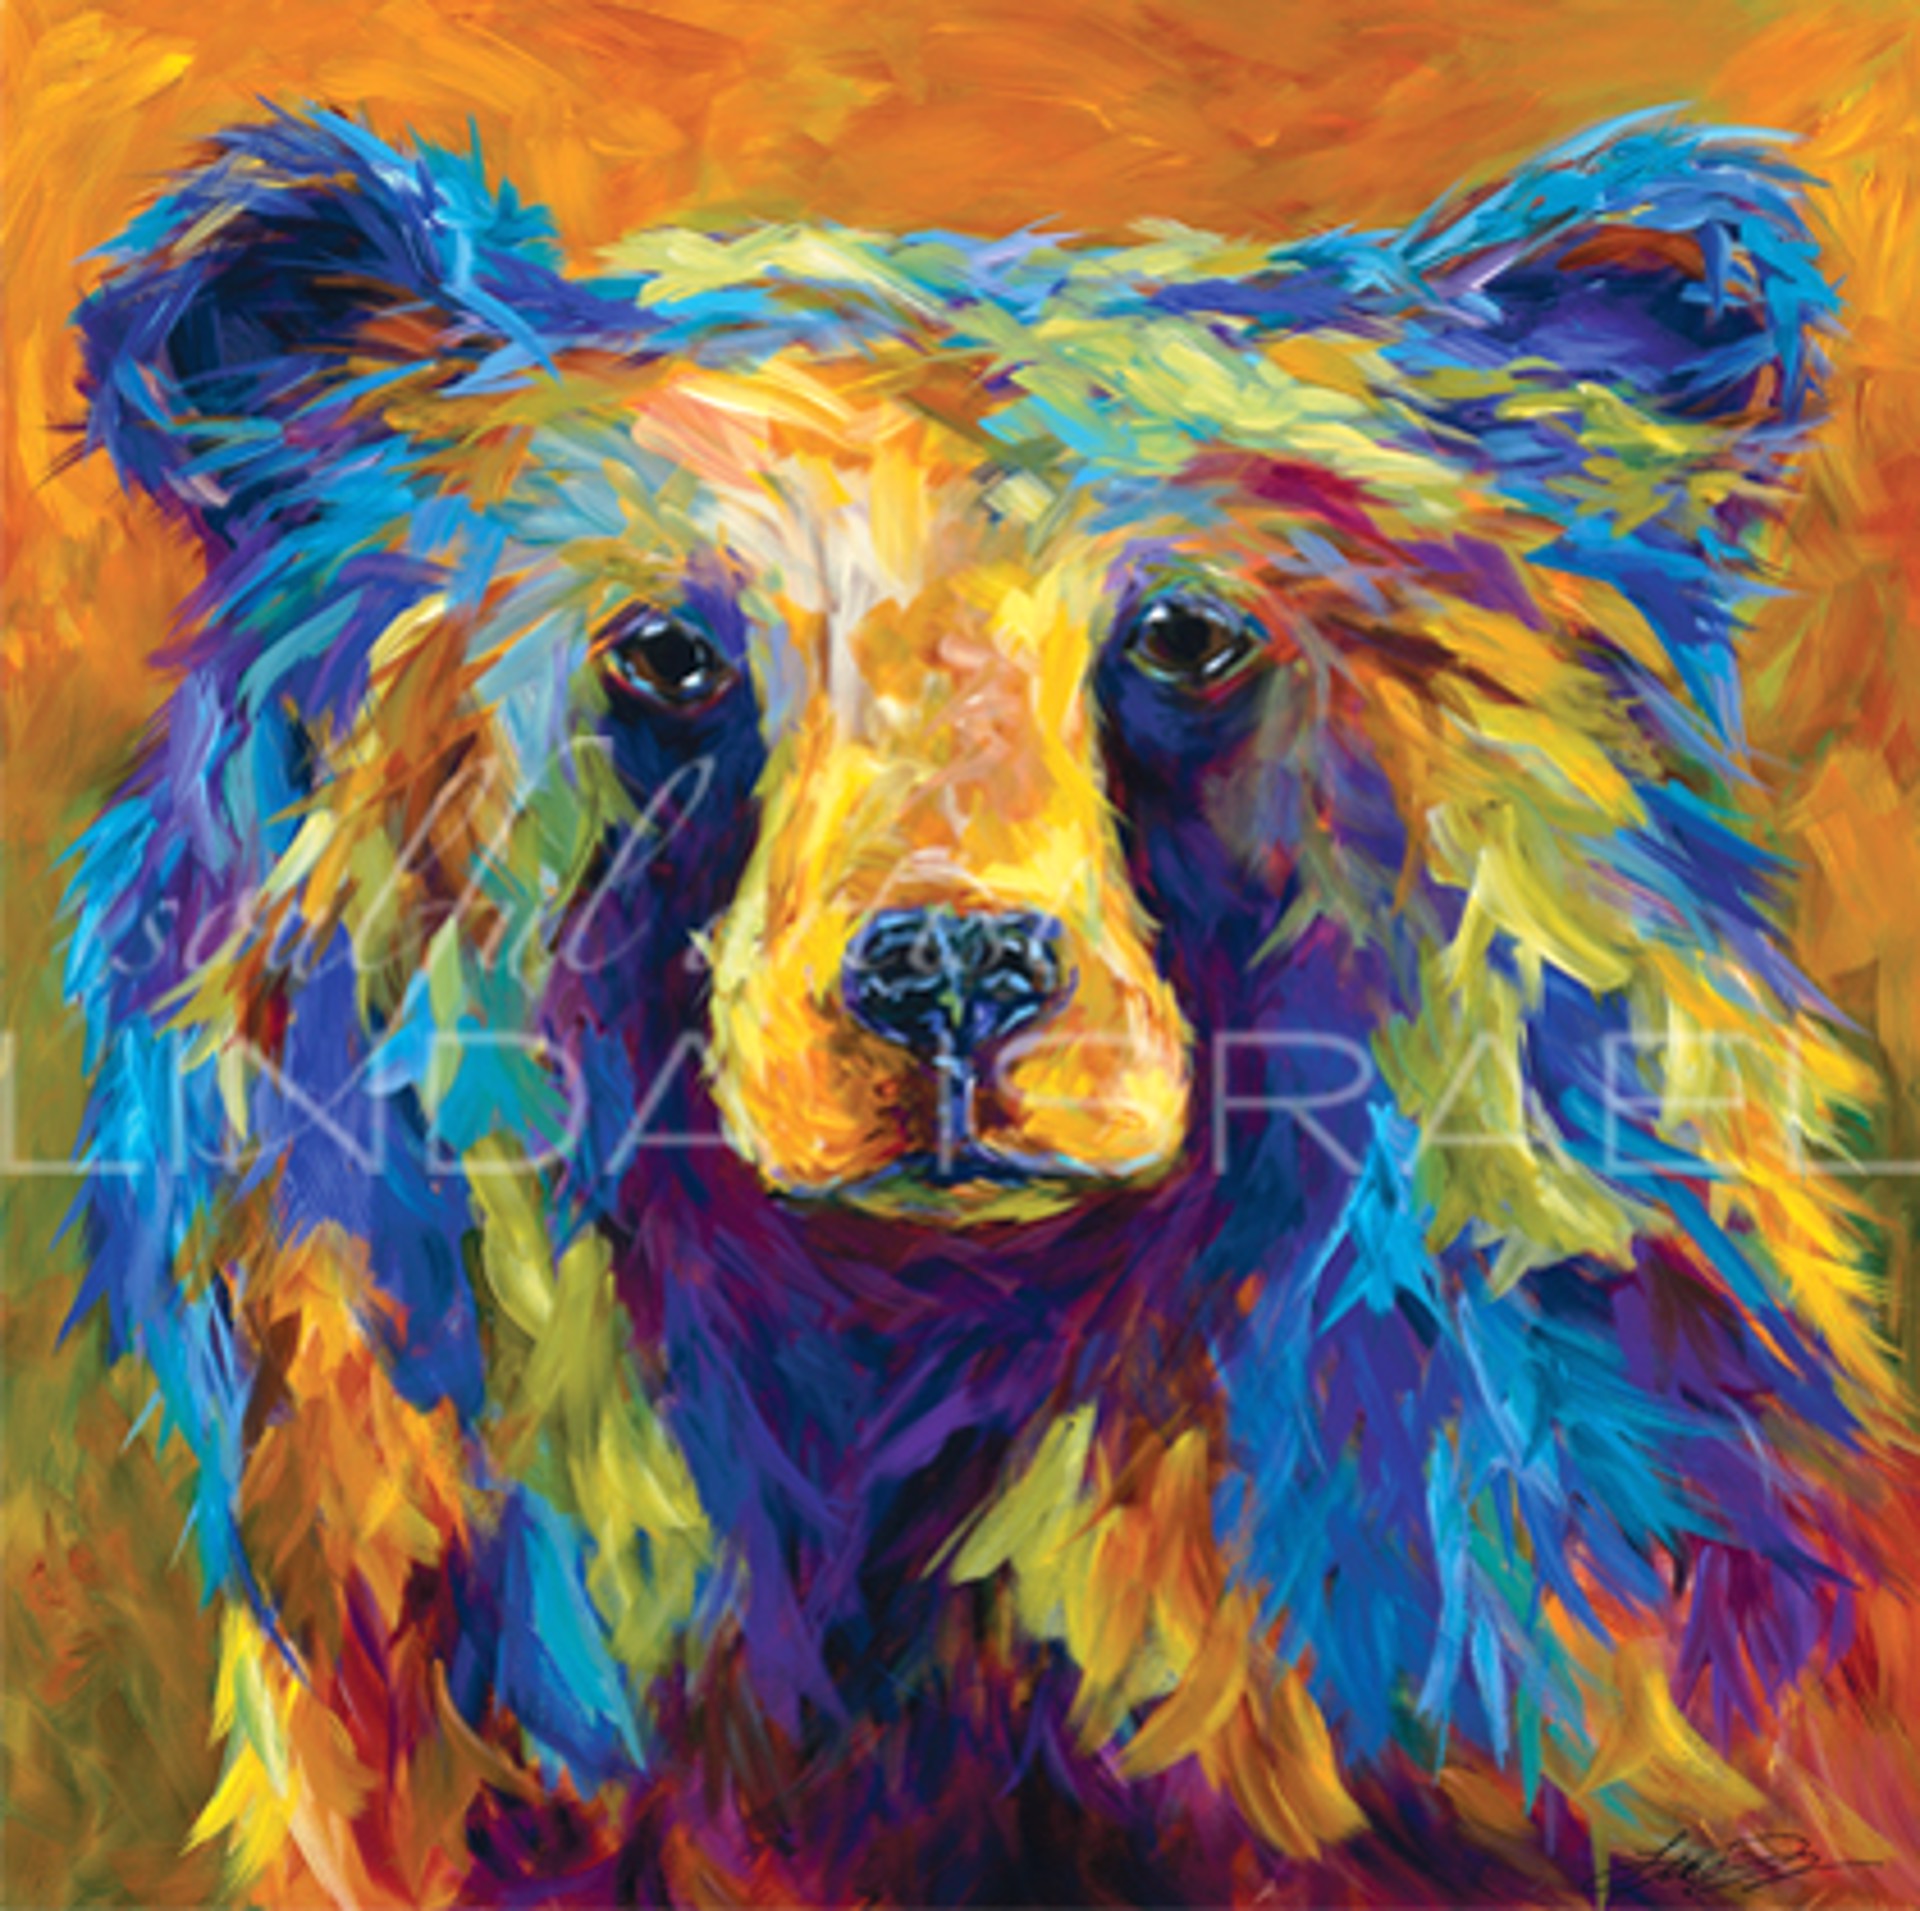 Commissioned Sun Bear Painting (SOLD) by LINDA ISRAEL